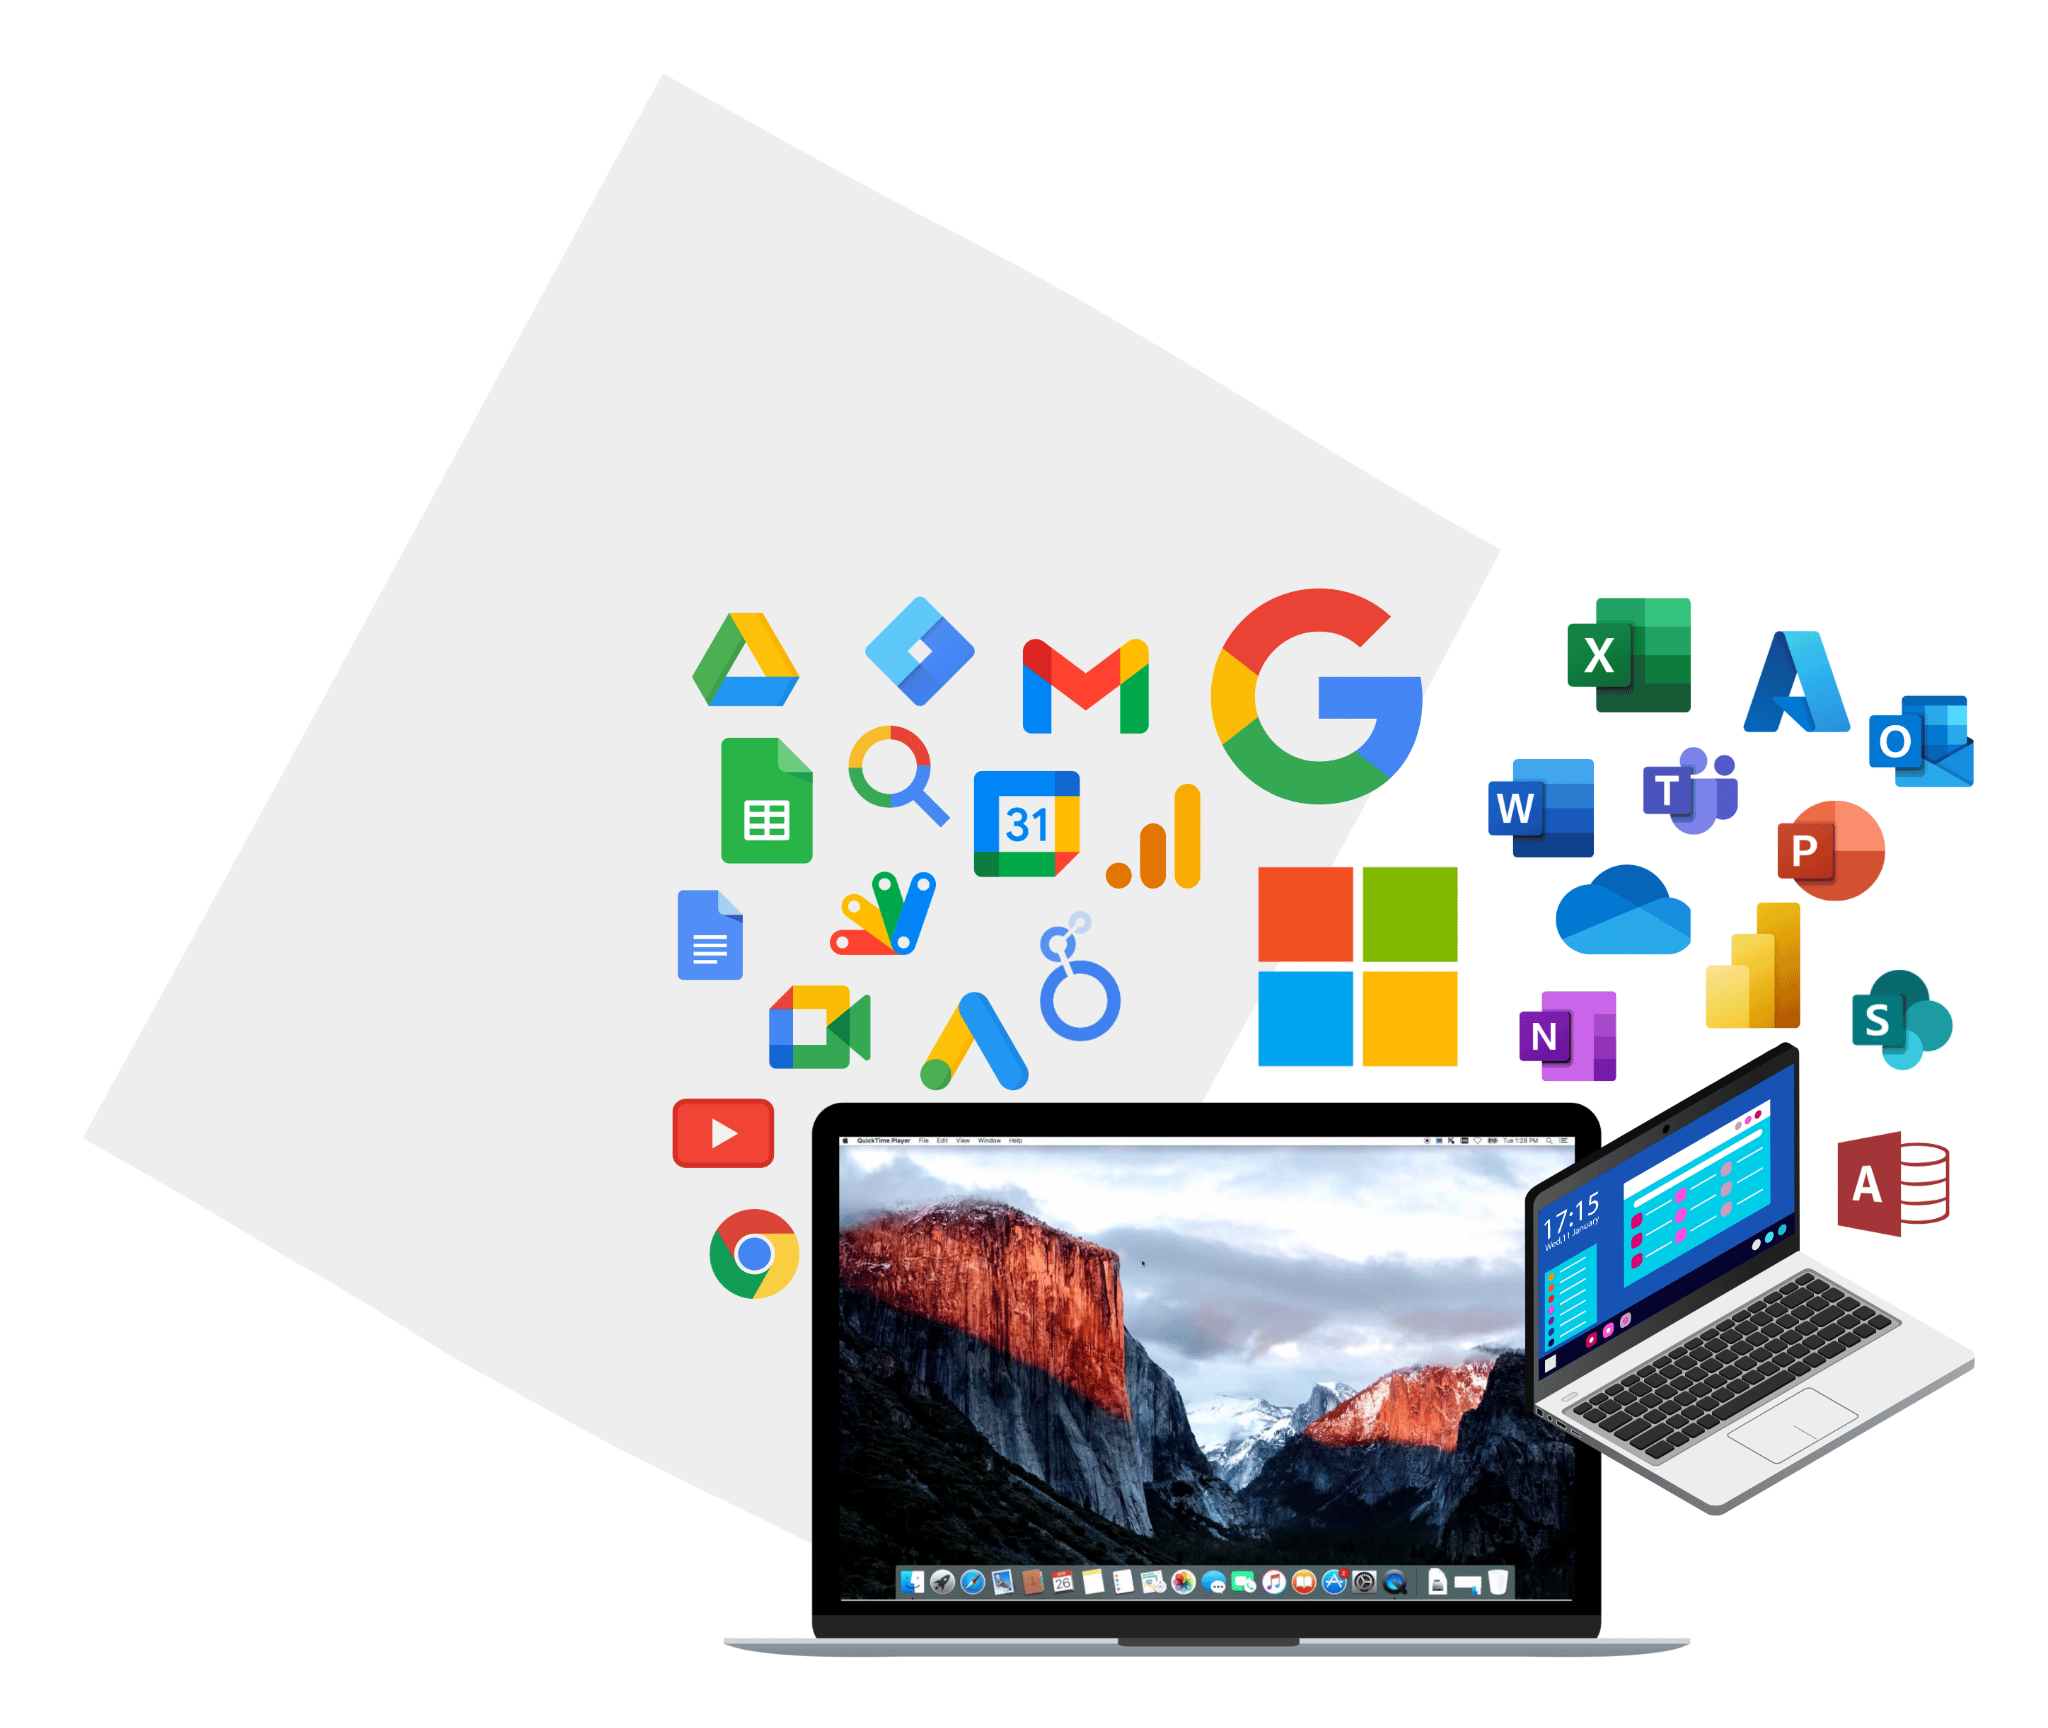 Comparison of Google and Microsoft tools on Mac and Windows.